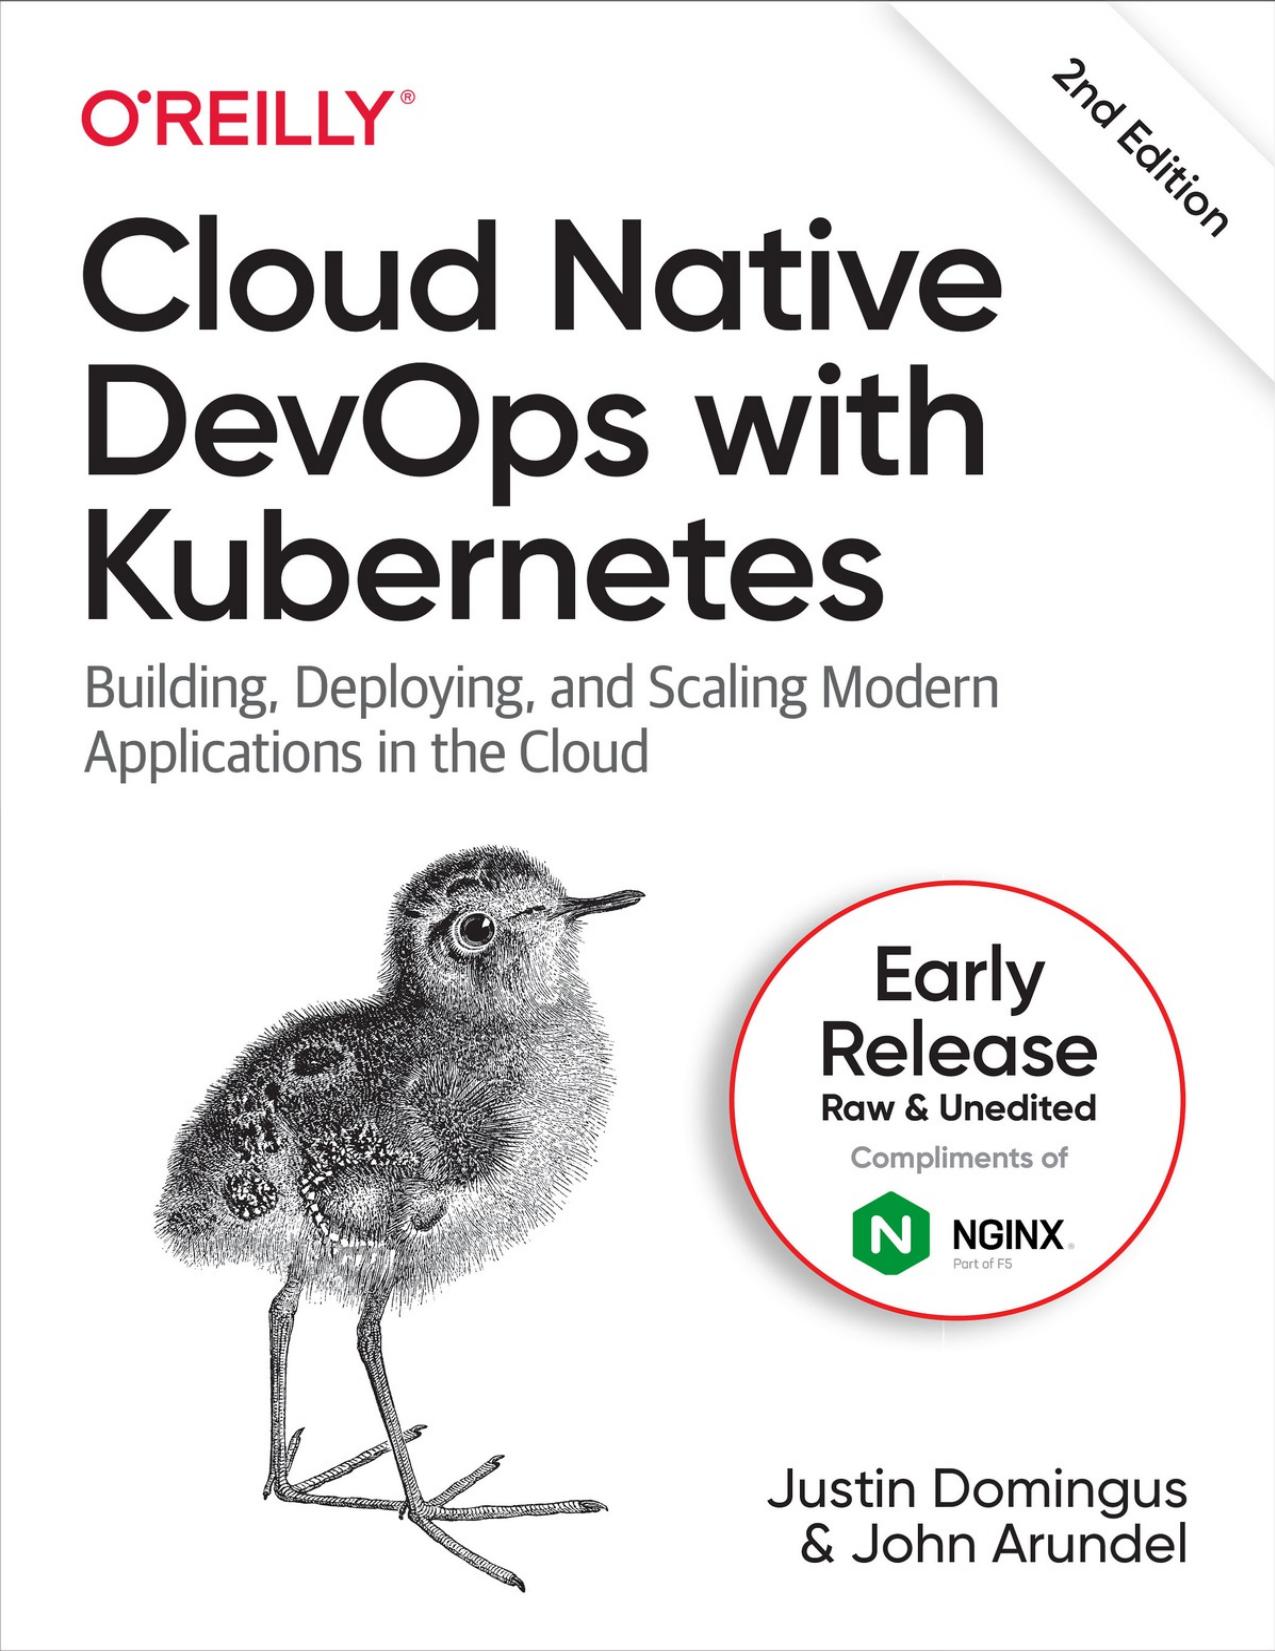 Cloud Native DevOps With Kubernetes: Building, Deploying, and Scaling Modern Applications in the Cloud - Early Release